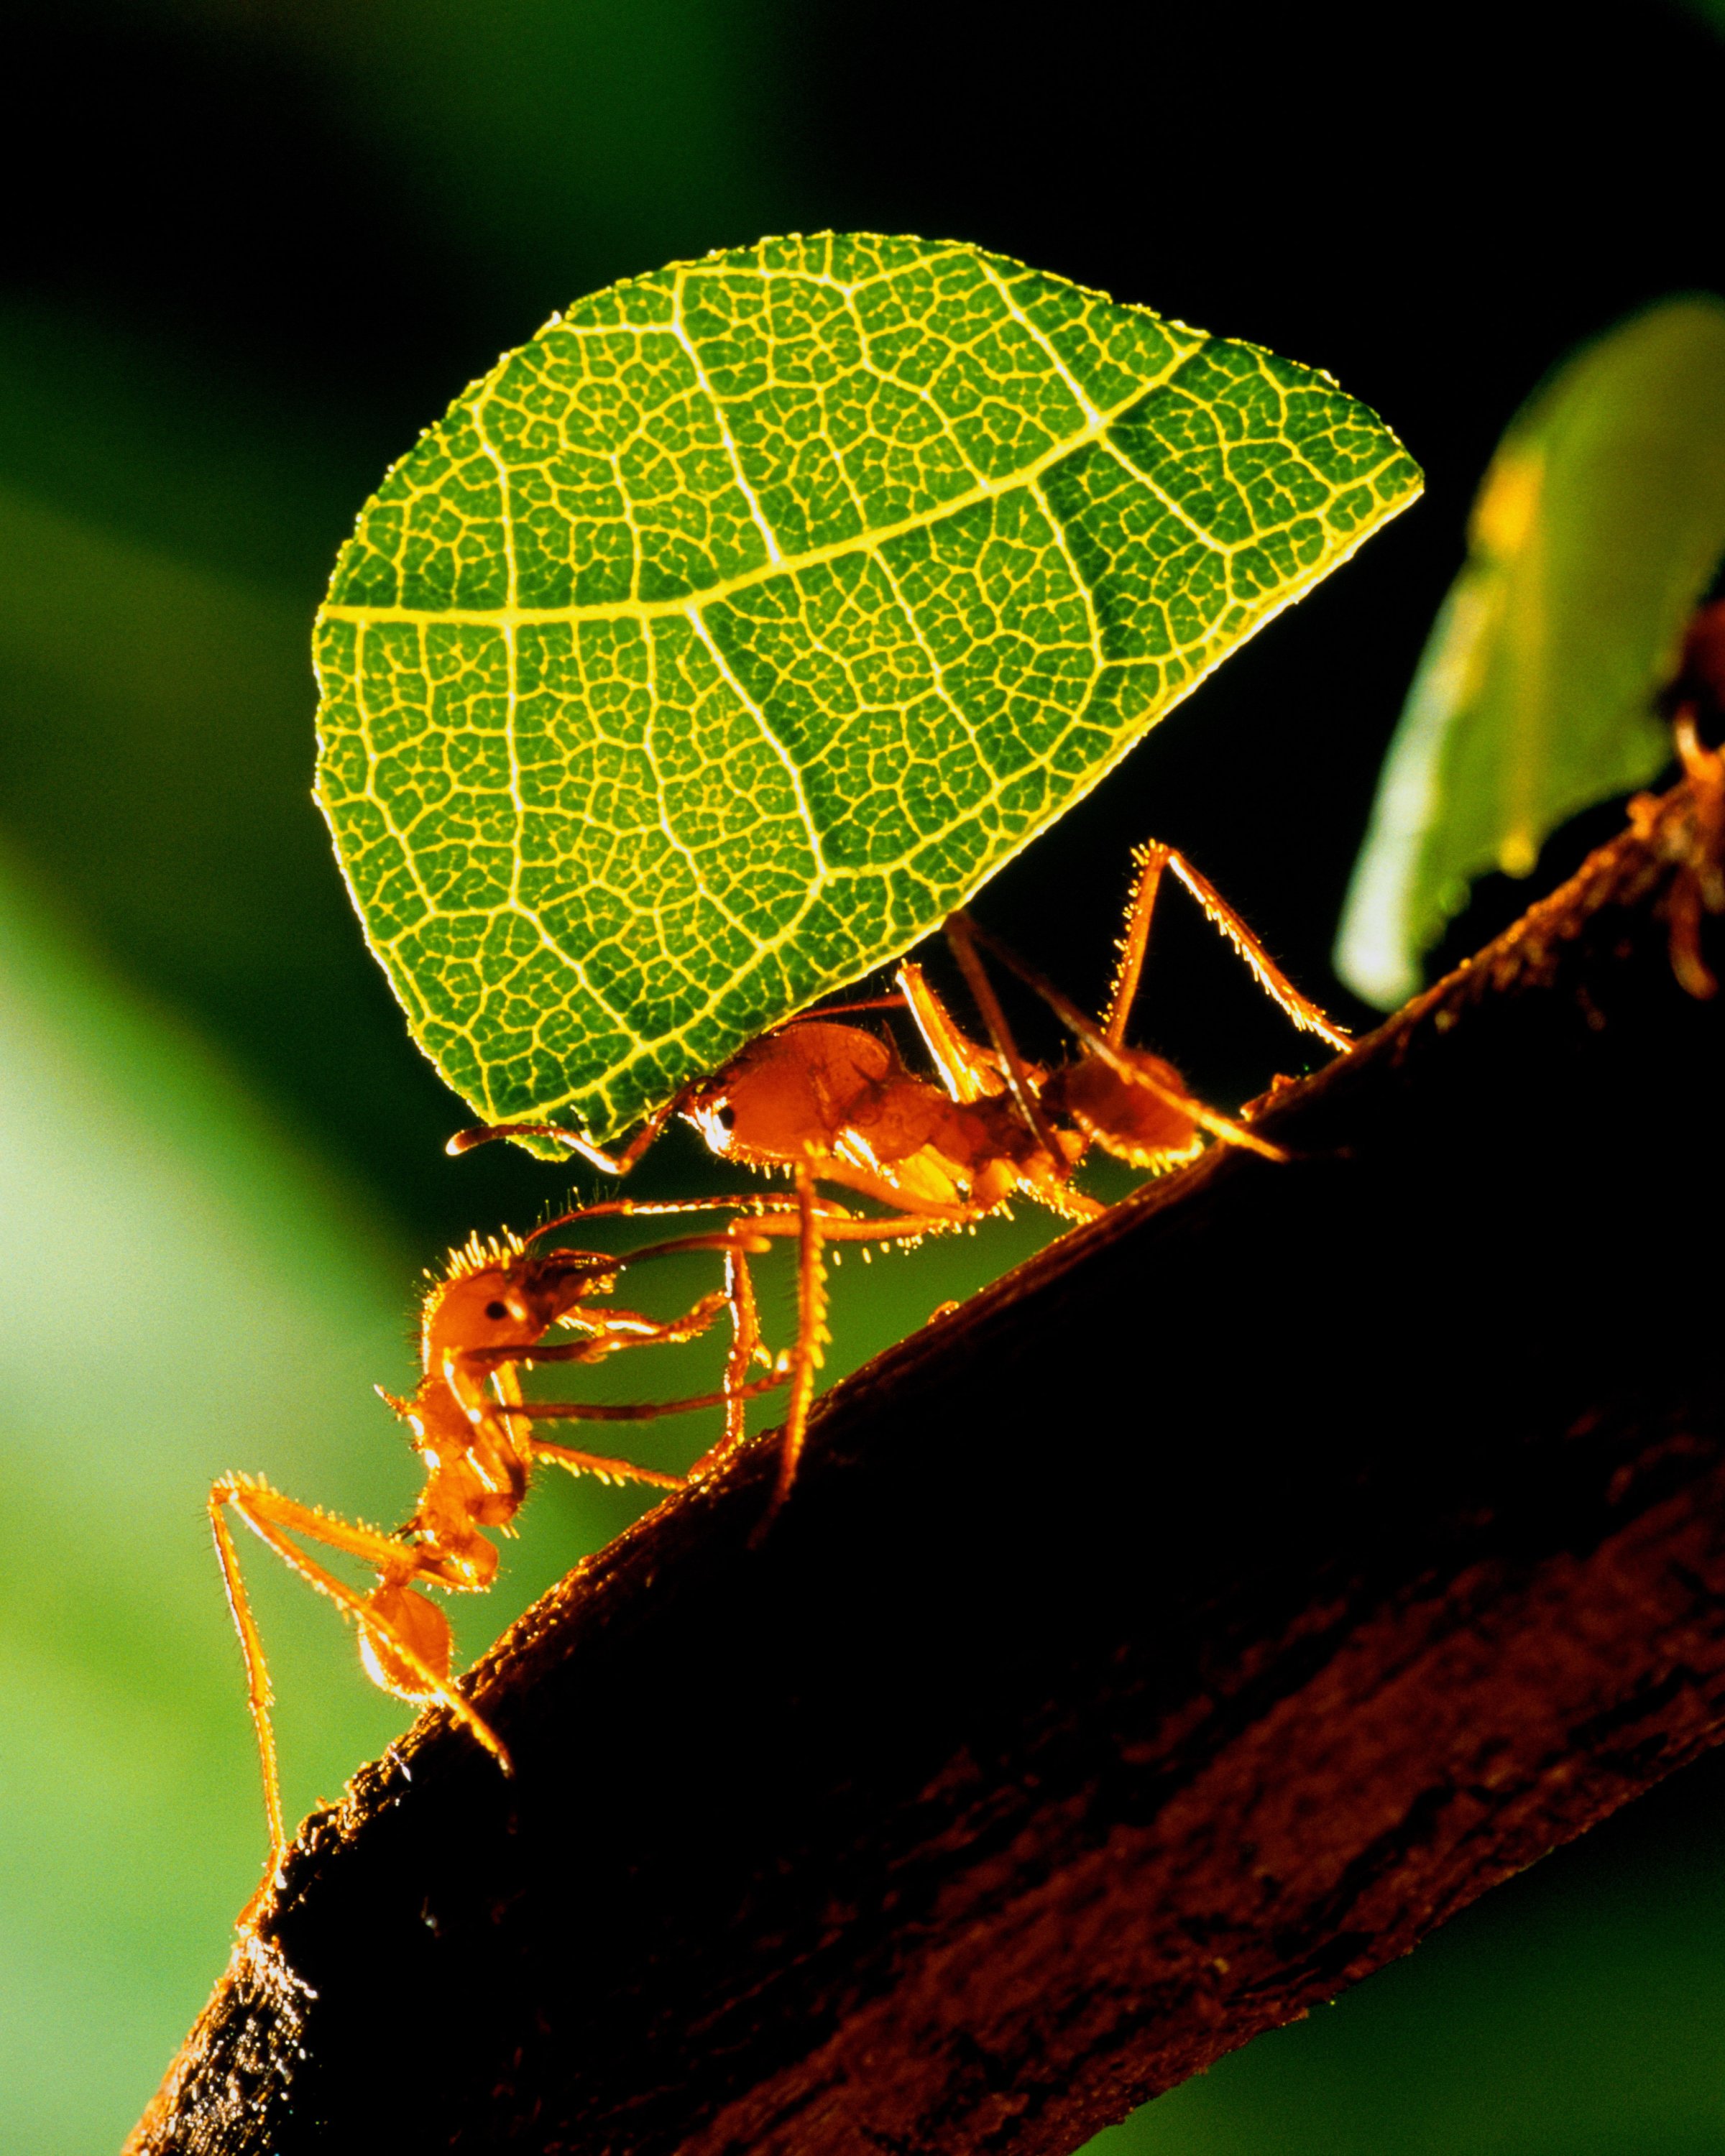 Leaf cutter ants (Atta sp.) carrying section of leaf